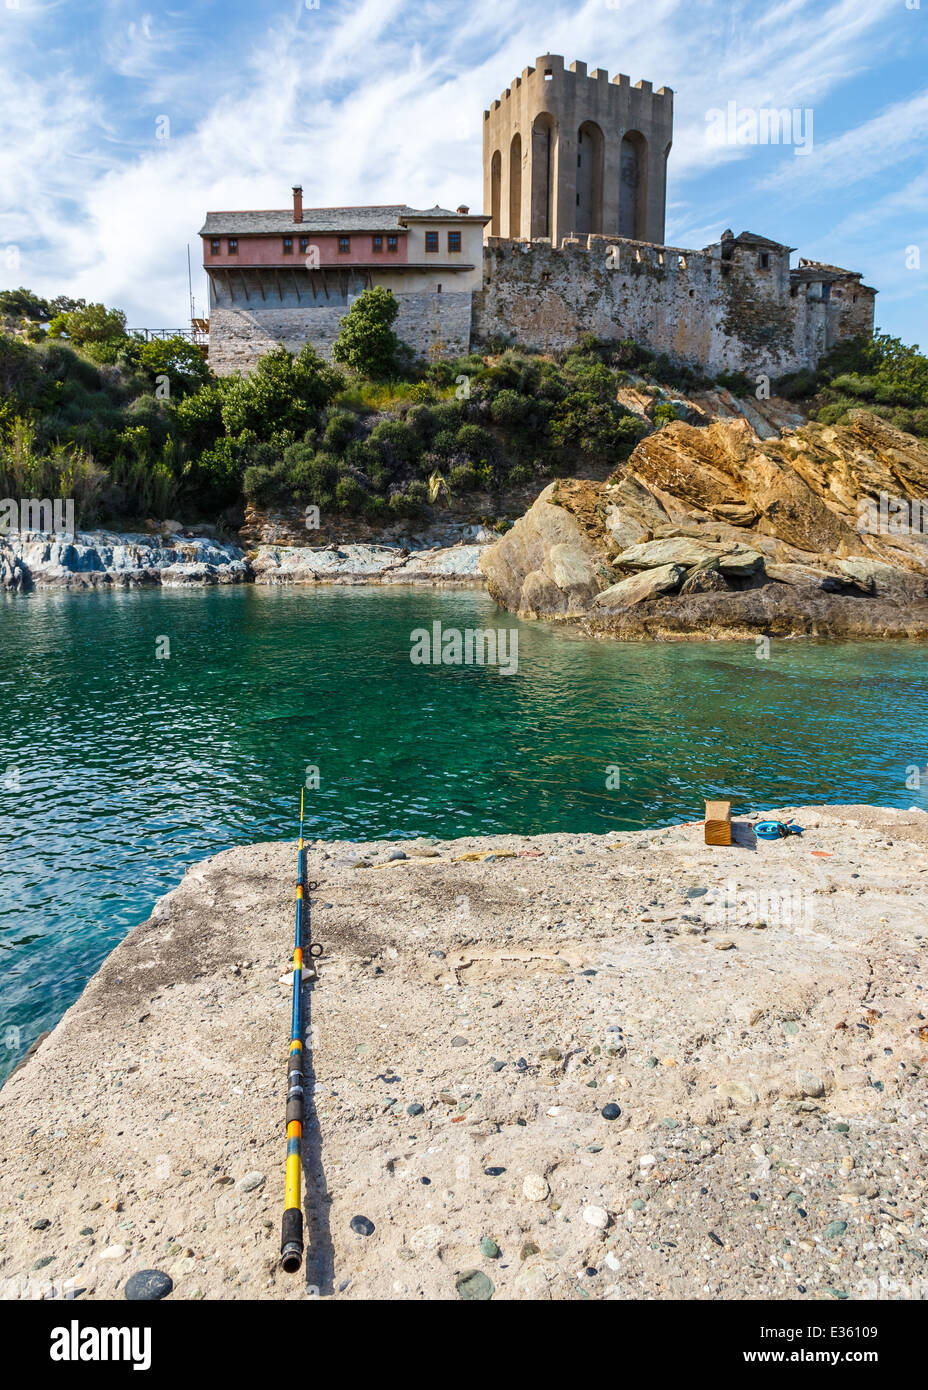 Abandoned fishing rod next to Megisti Lavra port (arsanas) in Holy Mount Athos in Greece with guesthouse in the background Stock Photo